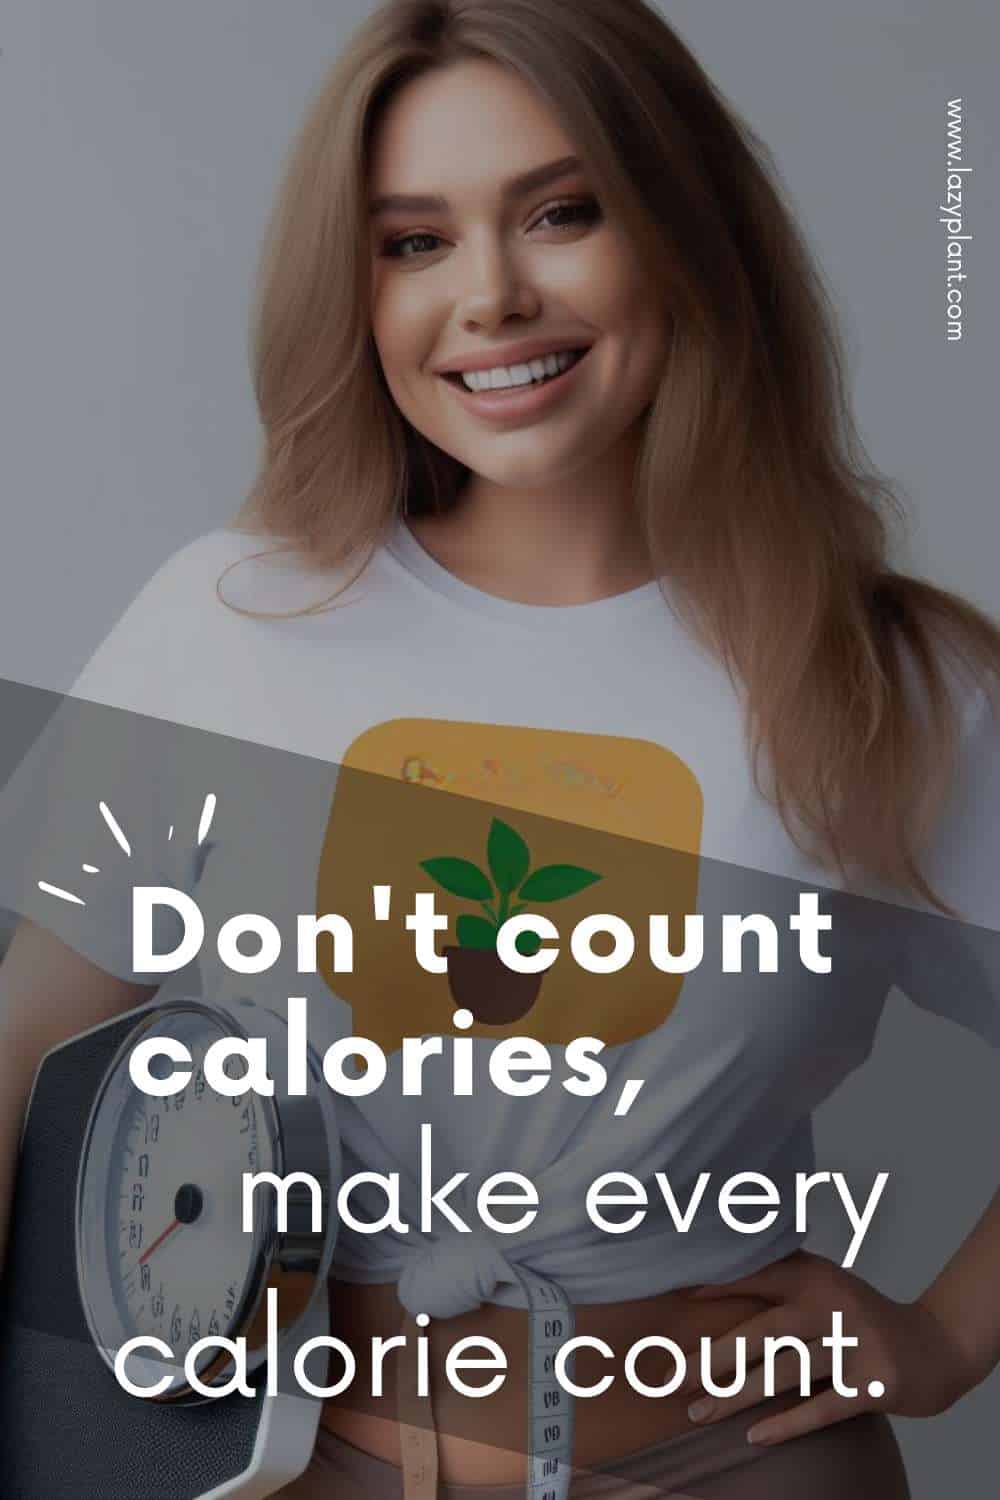 Don't count calories for Weight Loss.